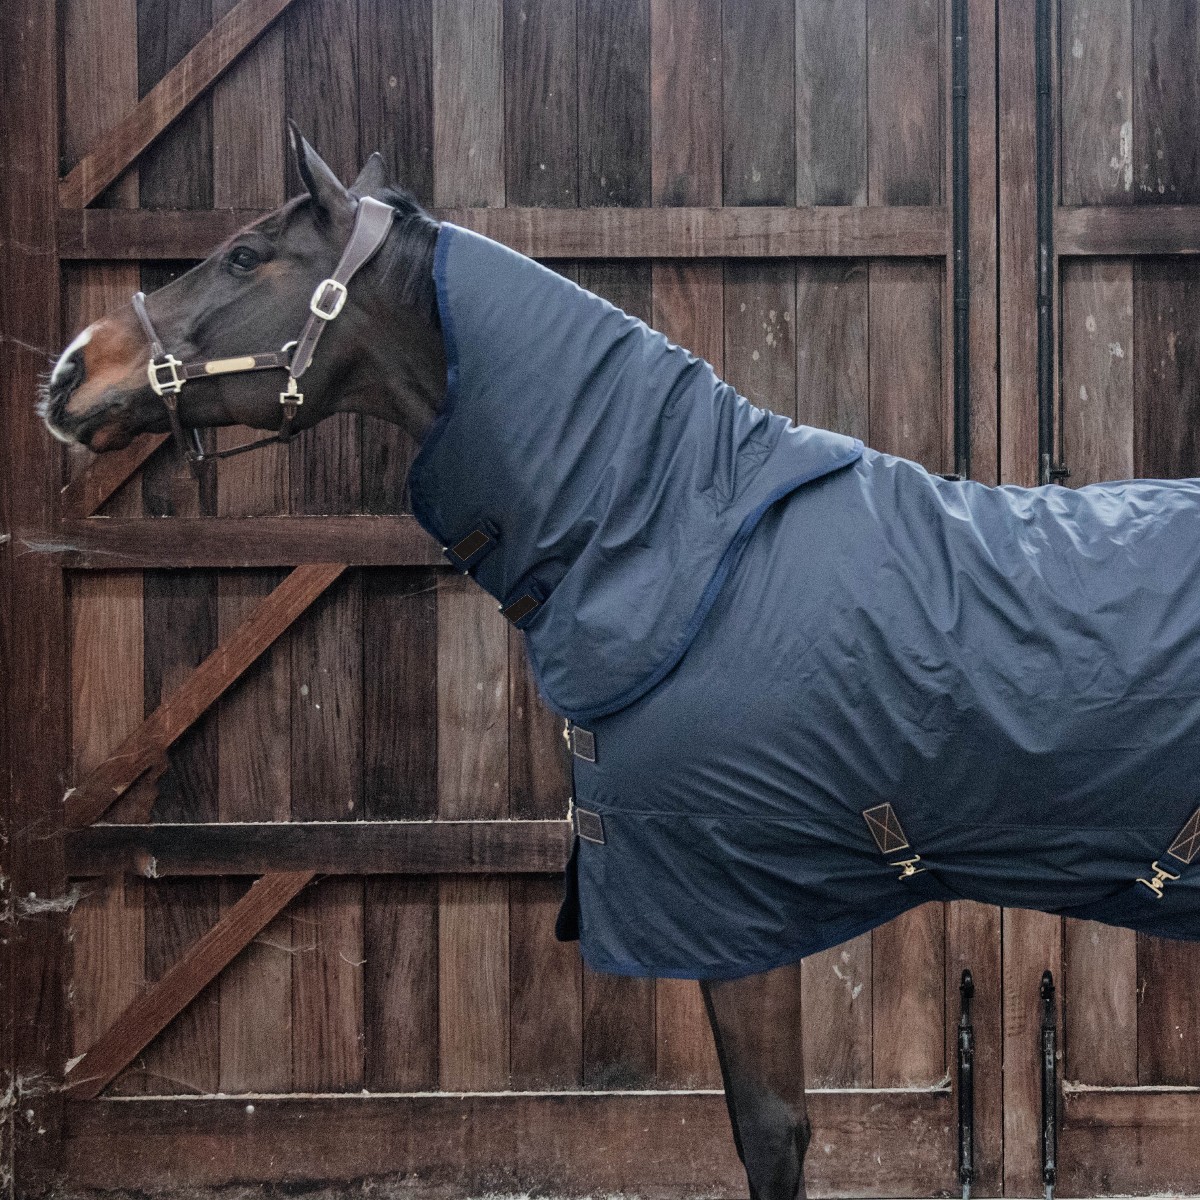 cou couverture hurricane 0g 150g Kentucky Horsewear Sellerie En Cadence Montfort l'Amaury cheval hiver pluie neck cover all weather